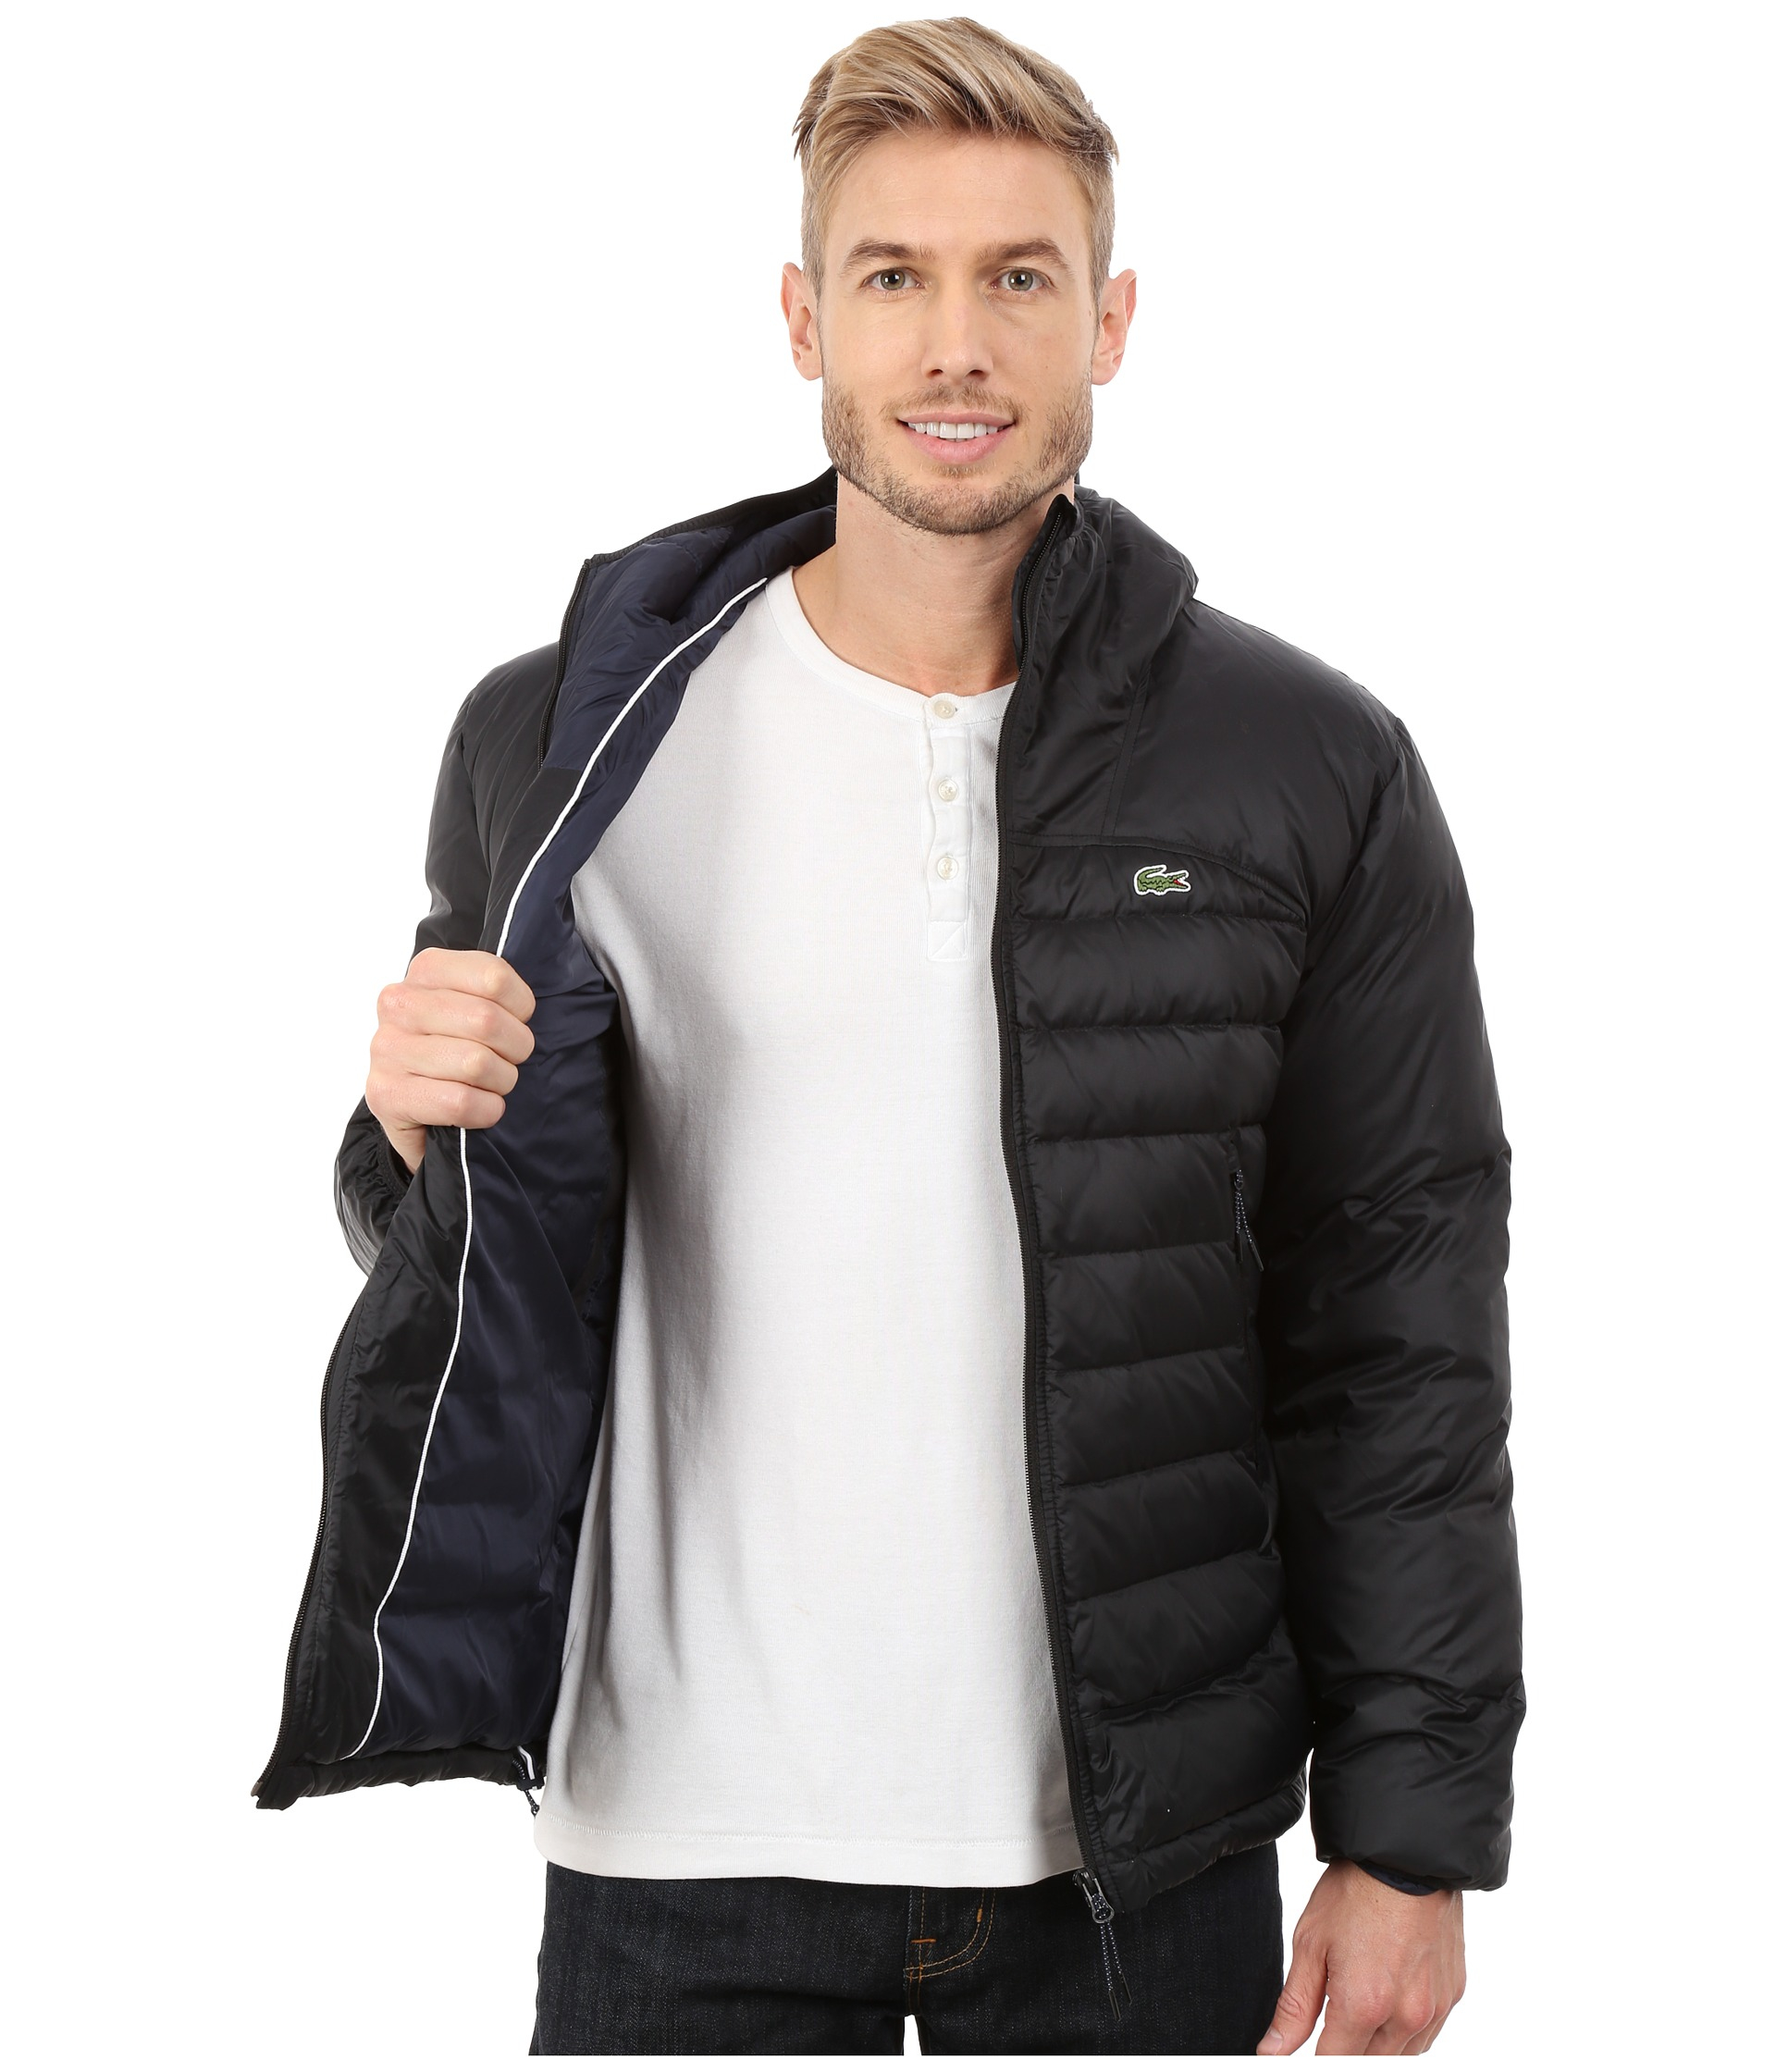 Lyst - Lacoste Light Weight Packable Down Jacket in Black for Men